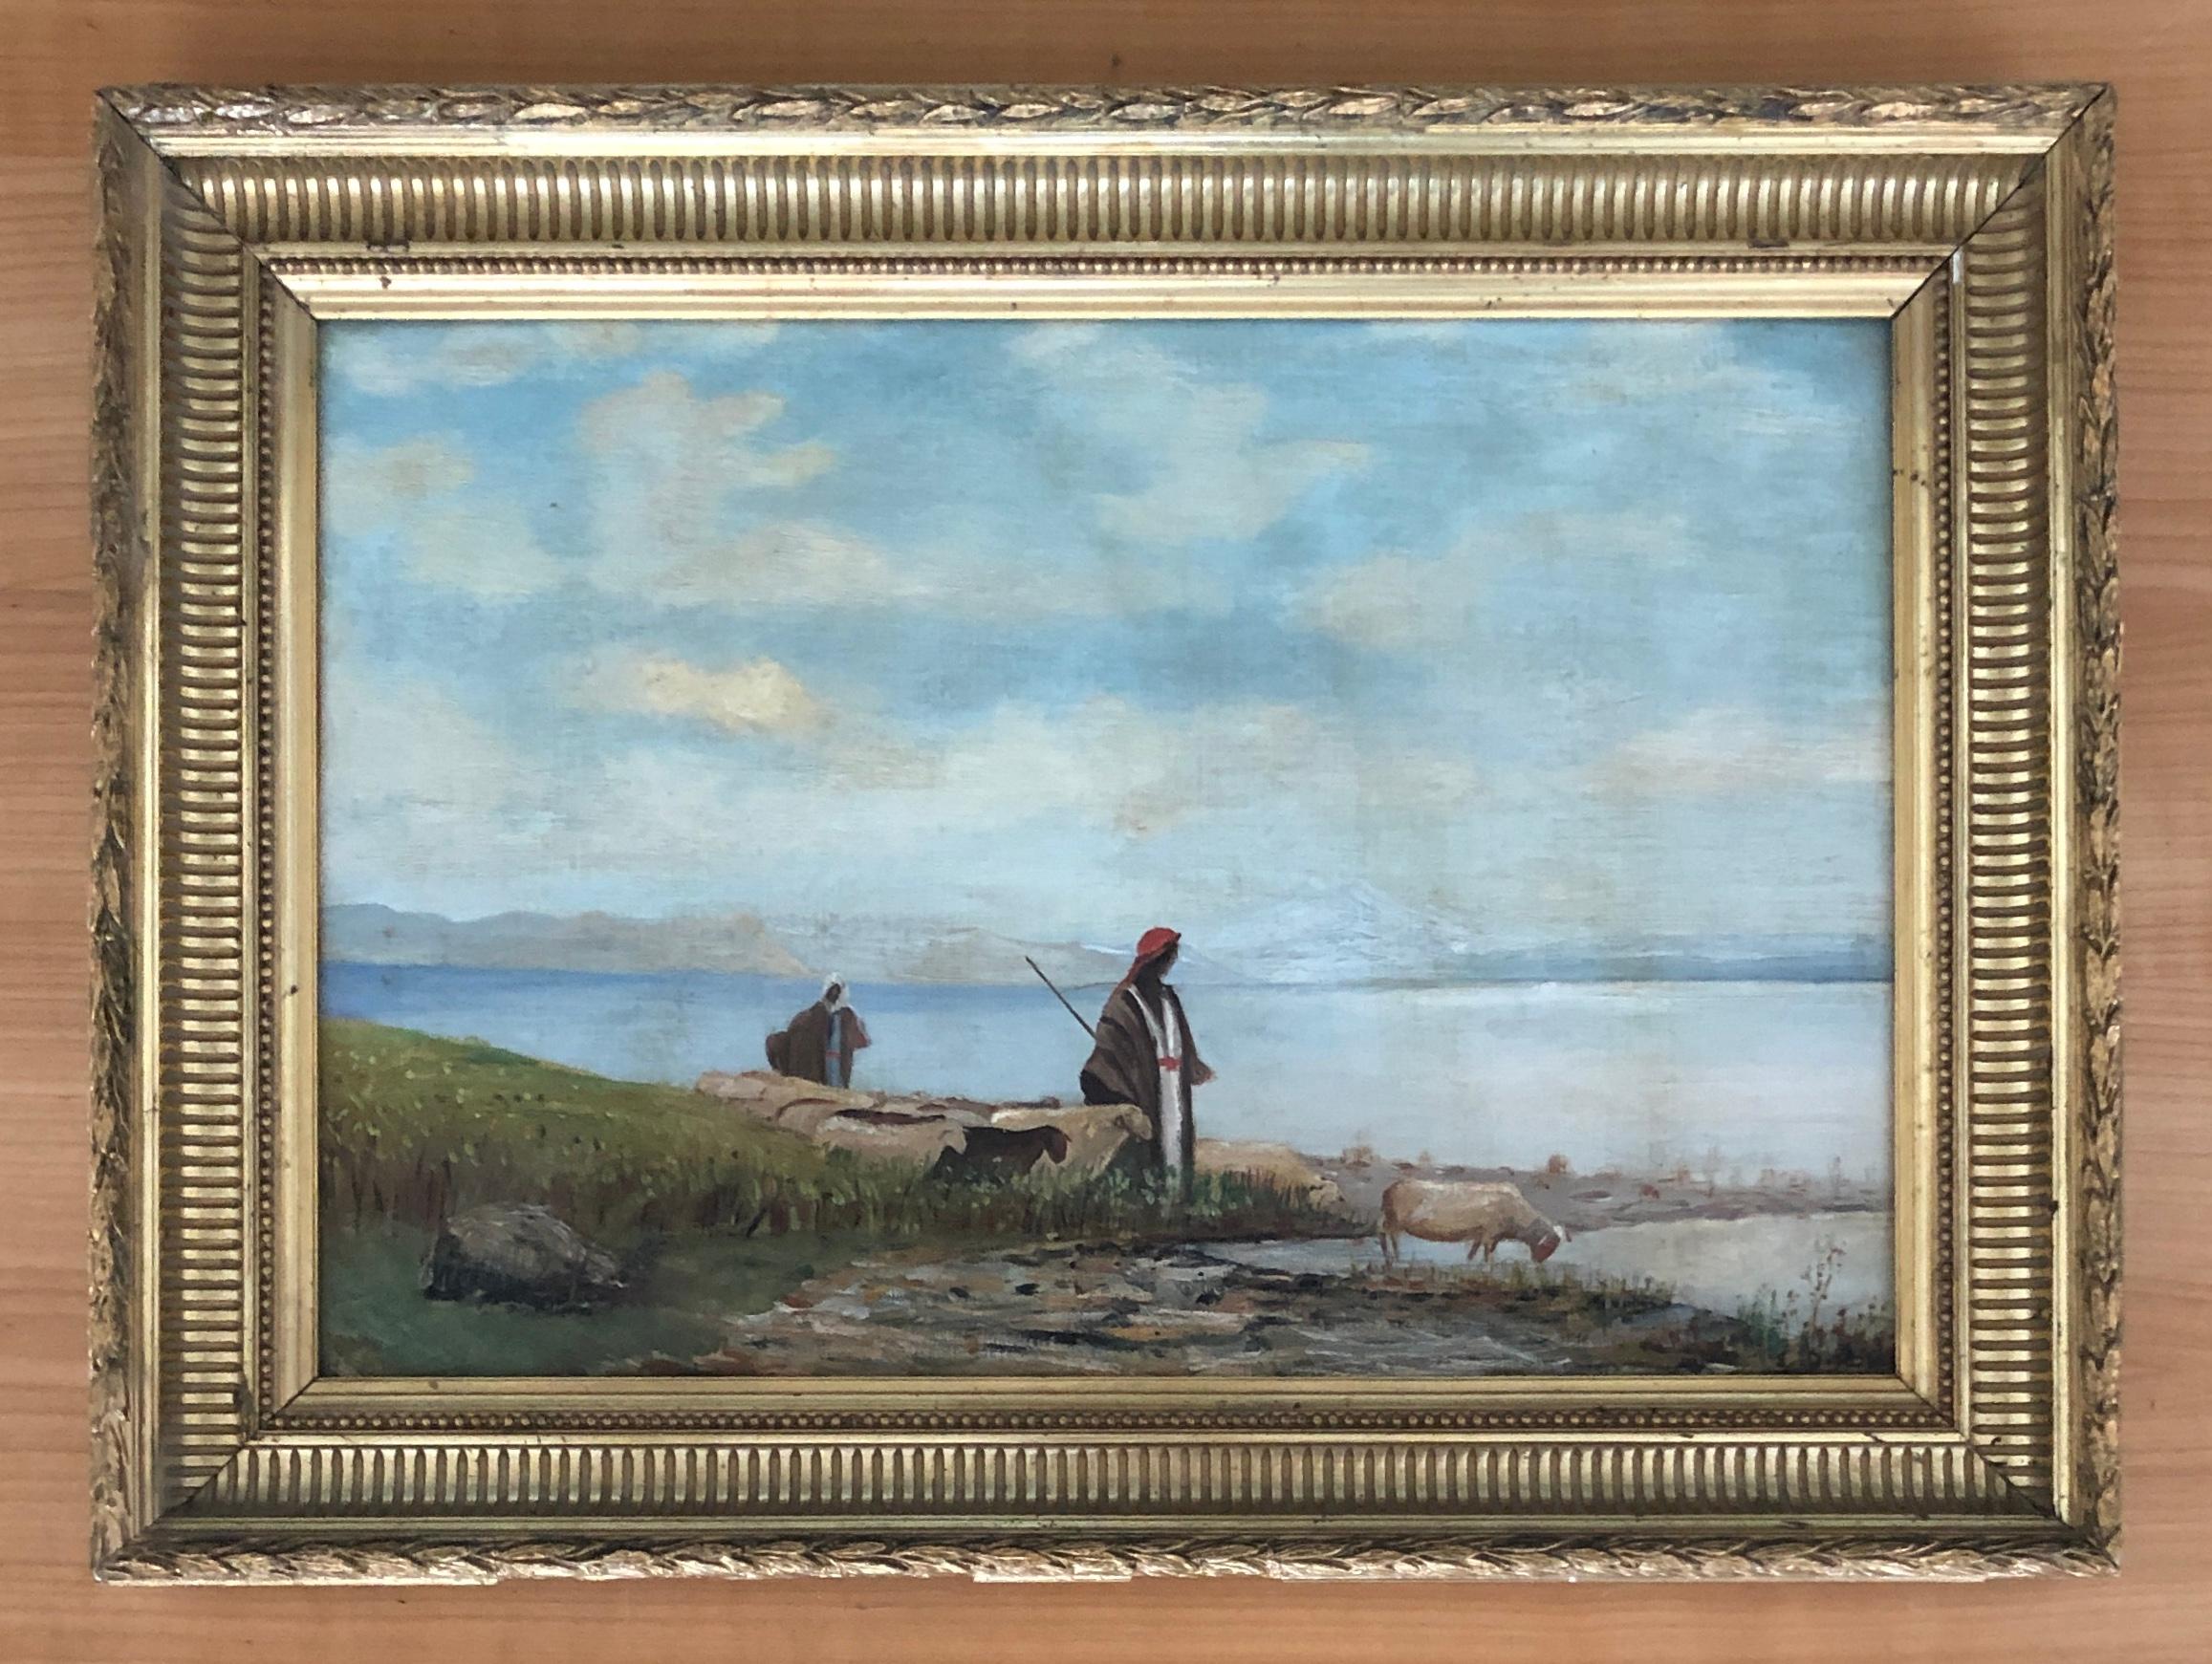 Shepherds and climb by a lake - Painting by Unknown